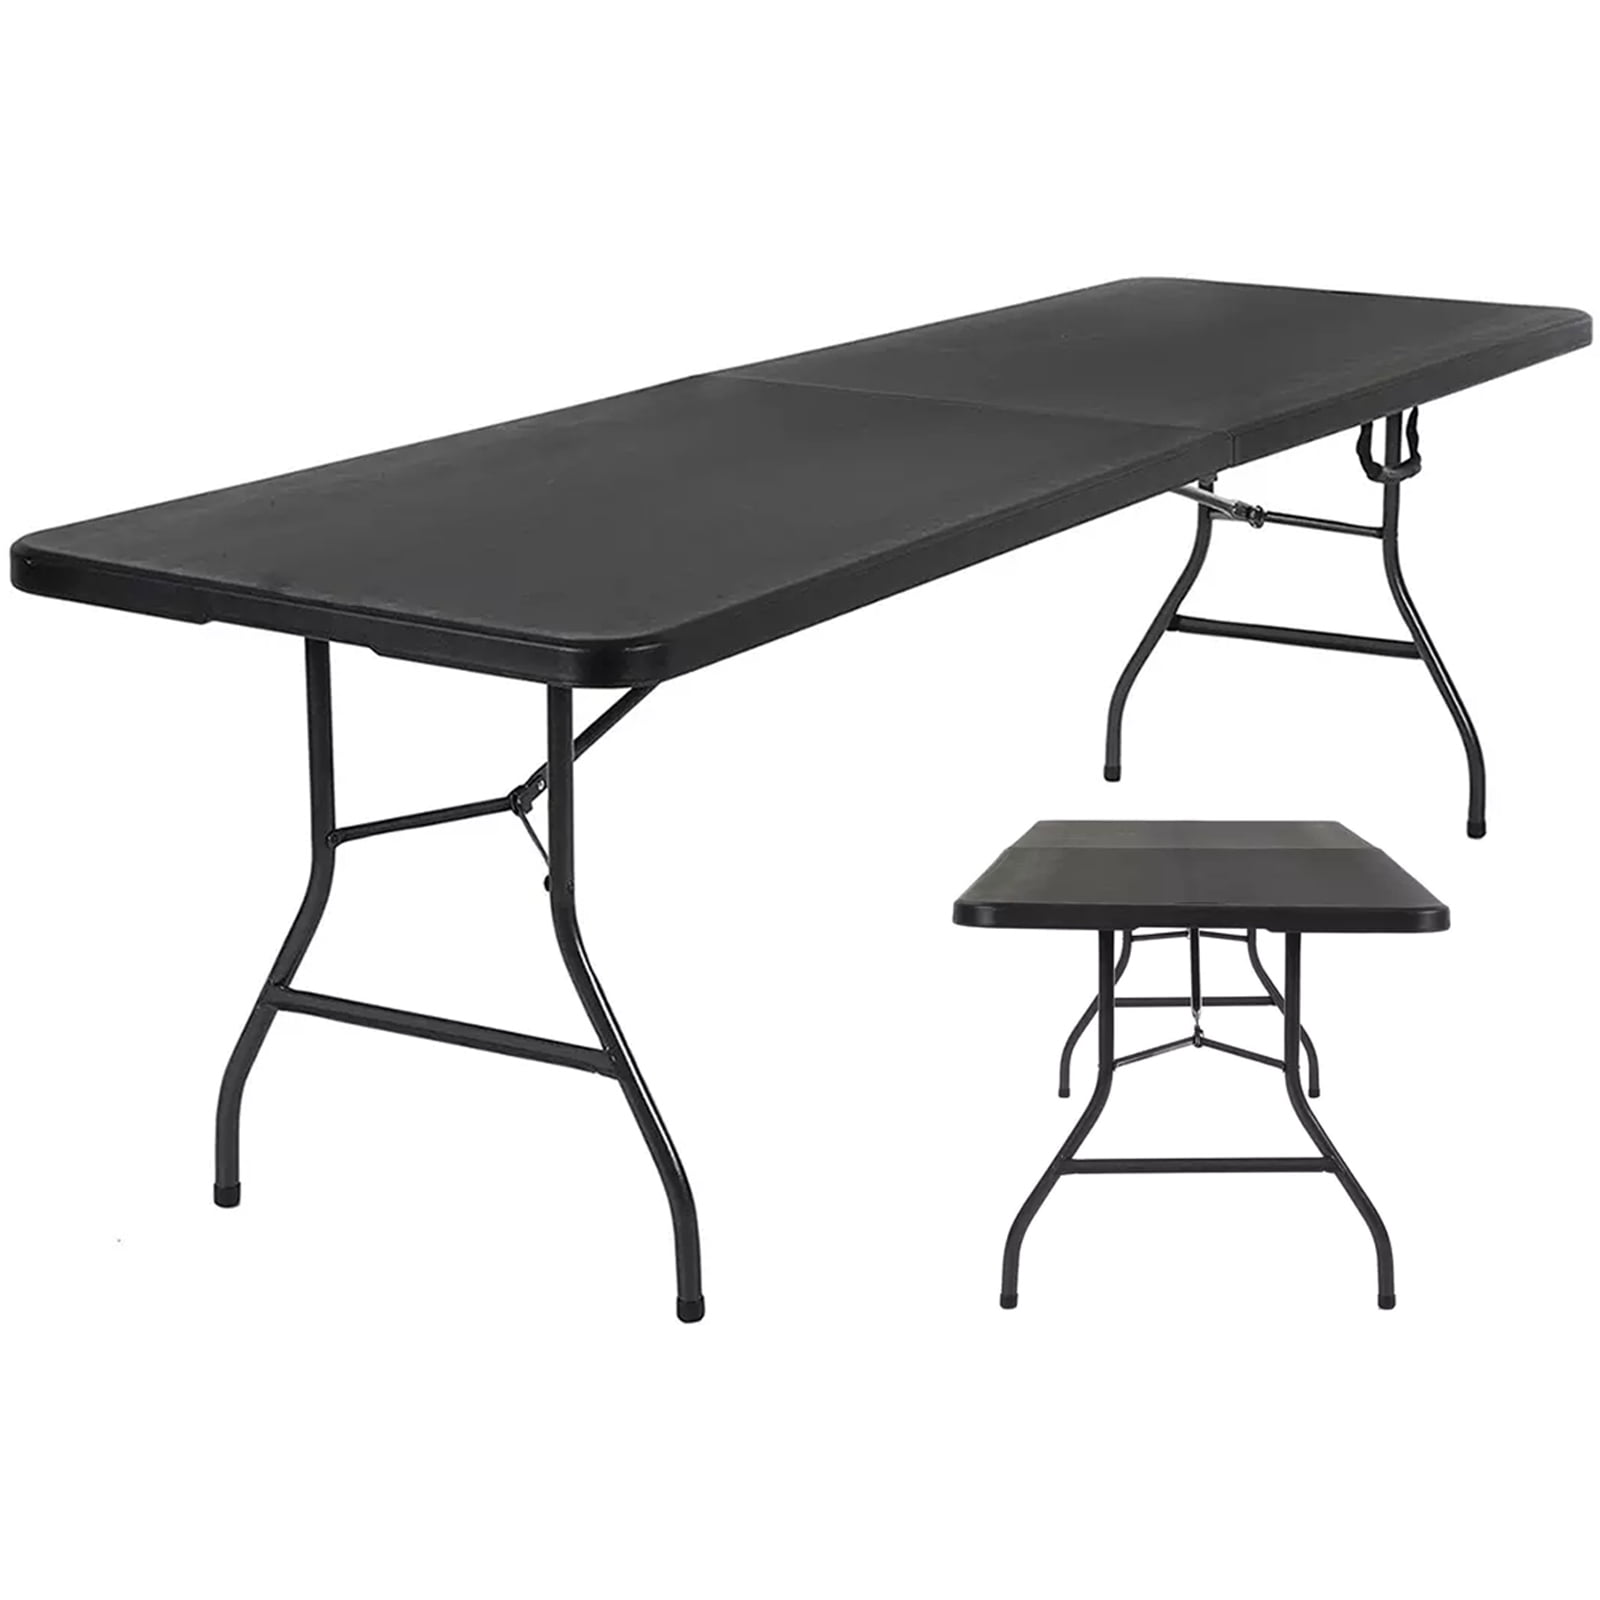 Details about   6 Ft Folding Table Half Fold Plastic Portable Home Office Party Travel Black New 